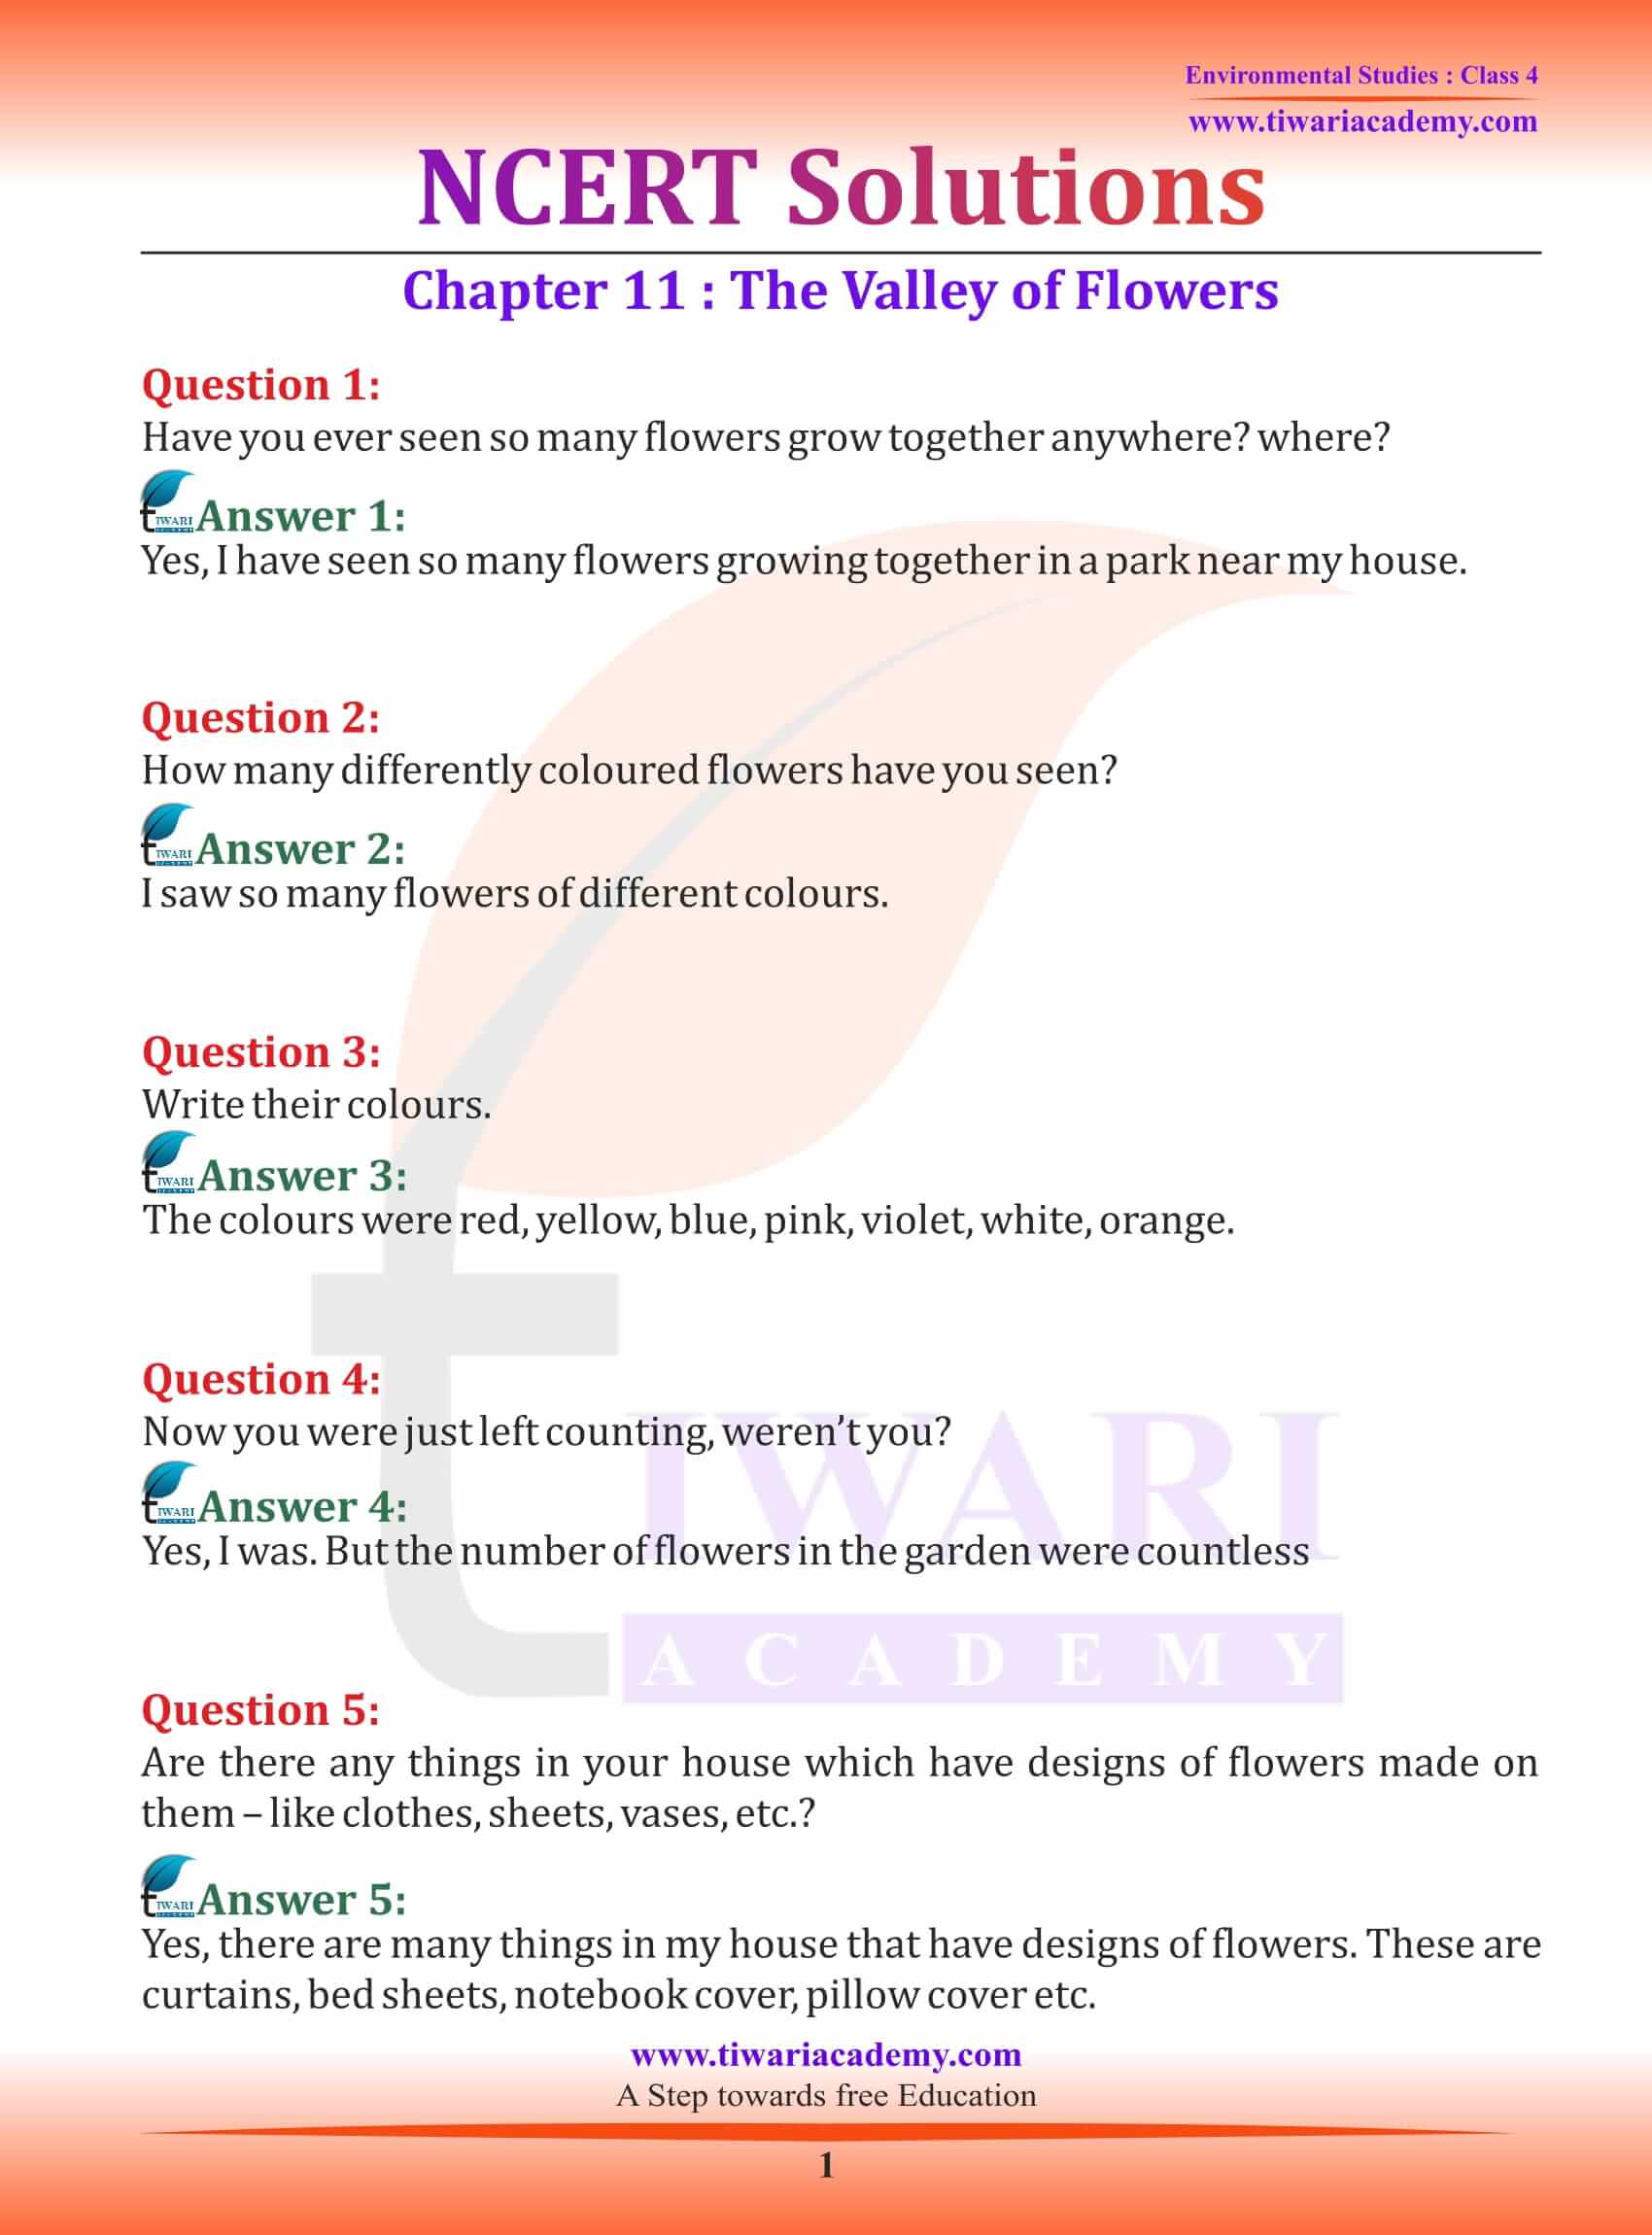 NCERT Solutions for Class 4 EVS Chapter 11 The Valley of Flowers